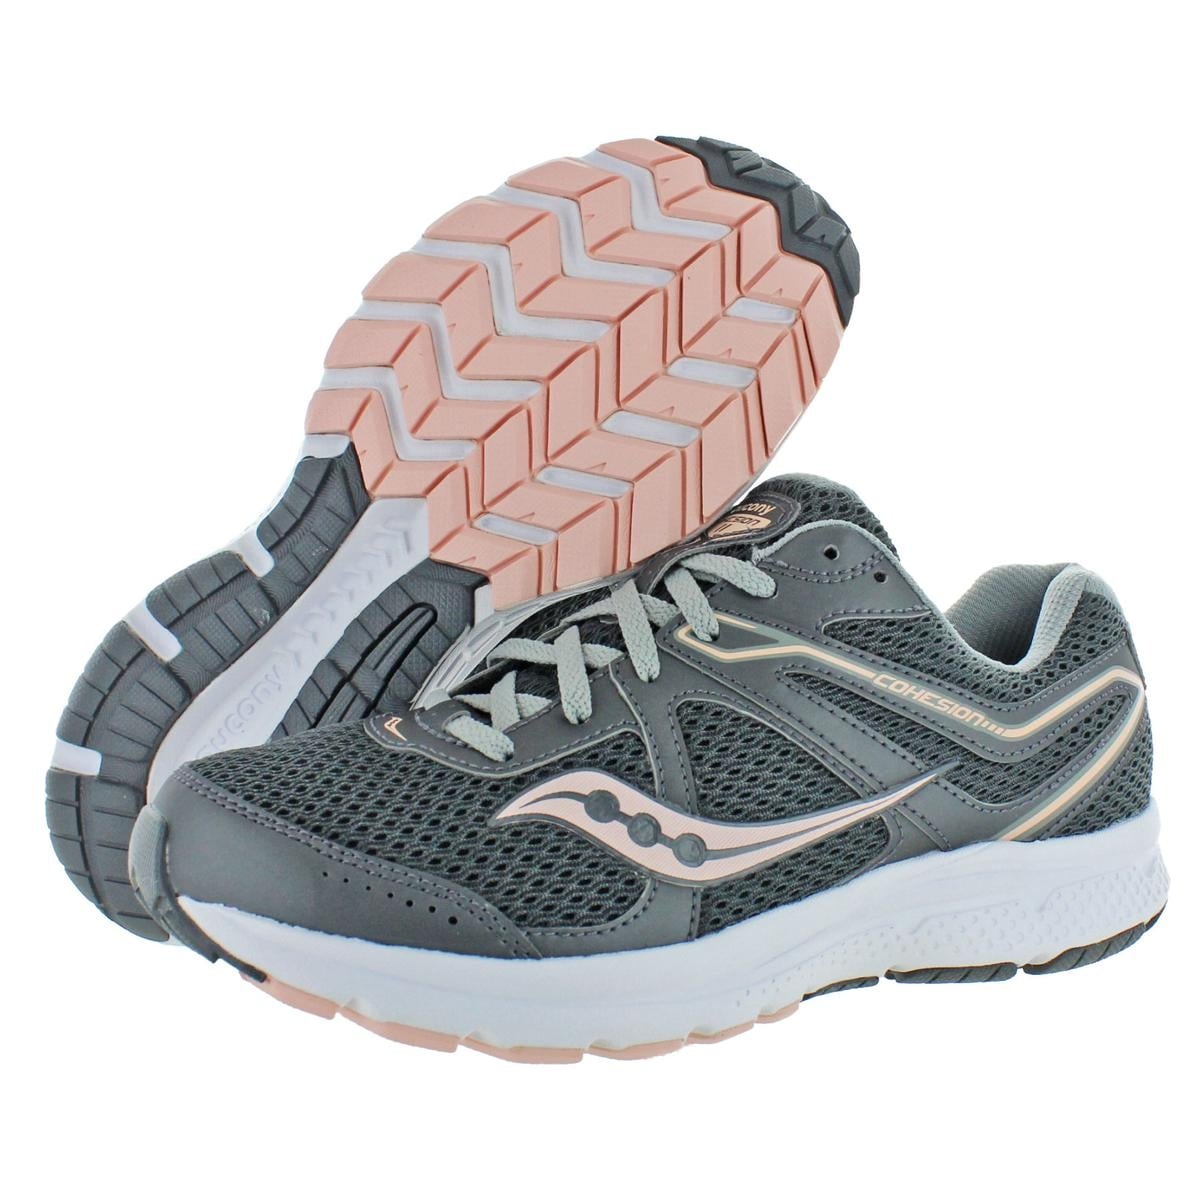 saucony grid cohesion 11 womens